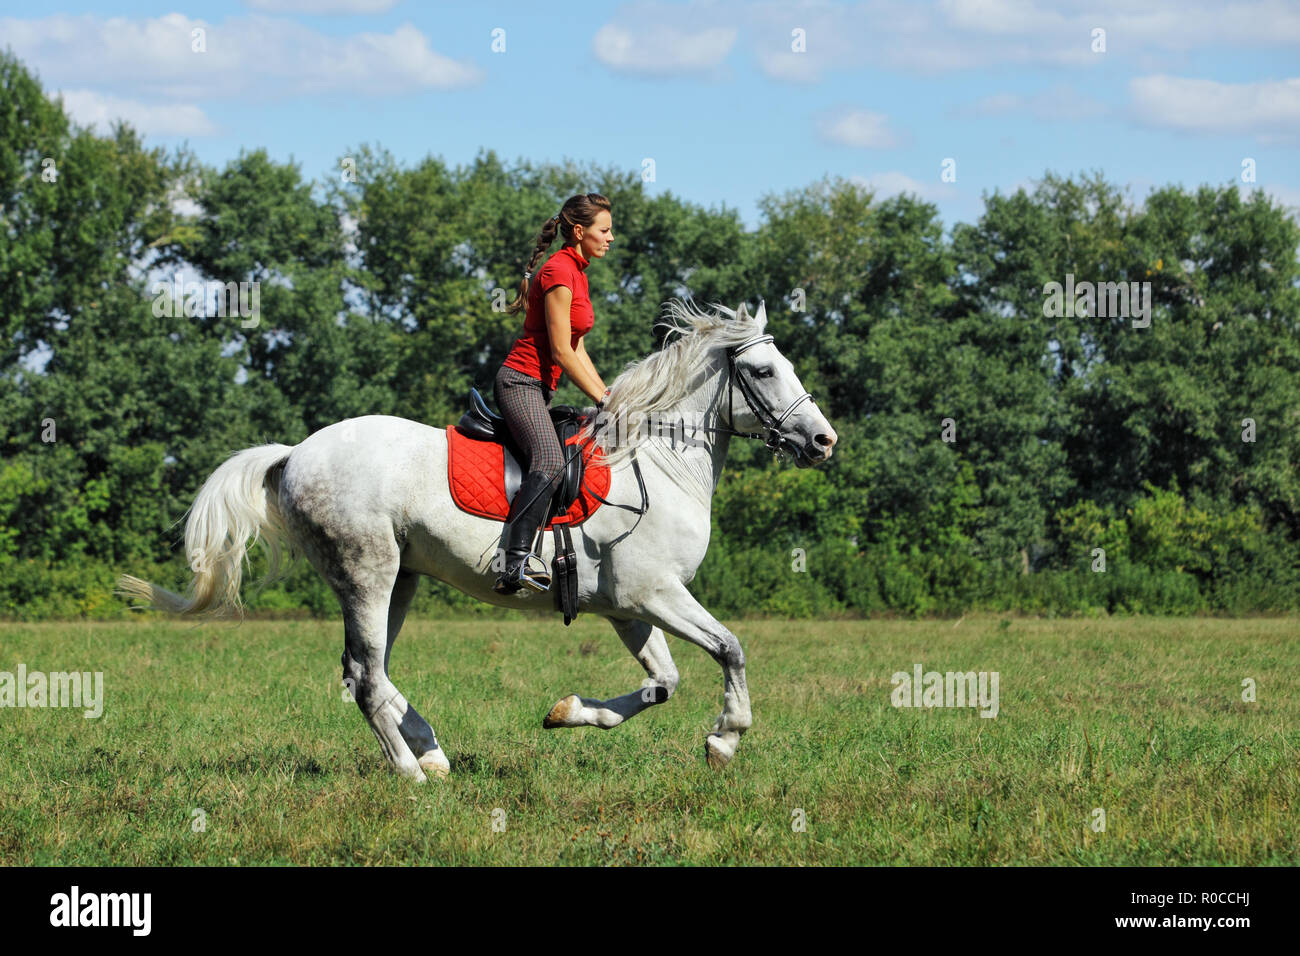 Equestrian training sportswoman with horse Stock Photo